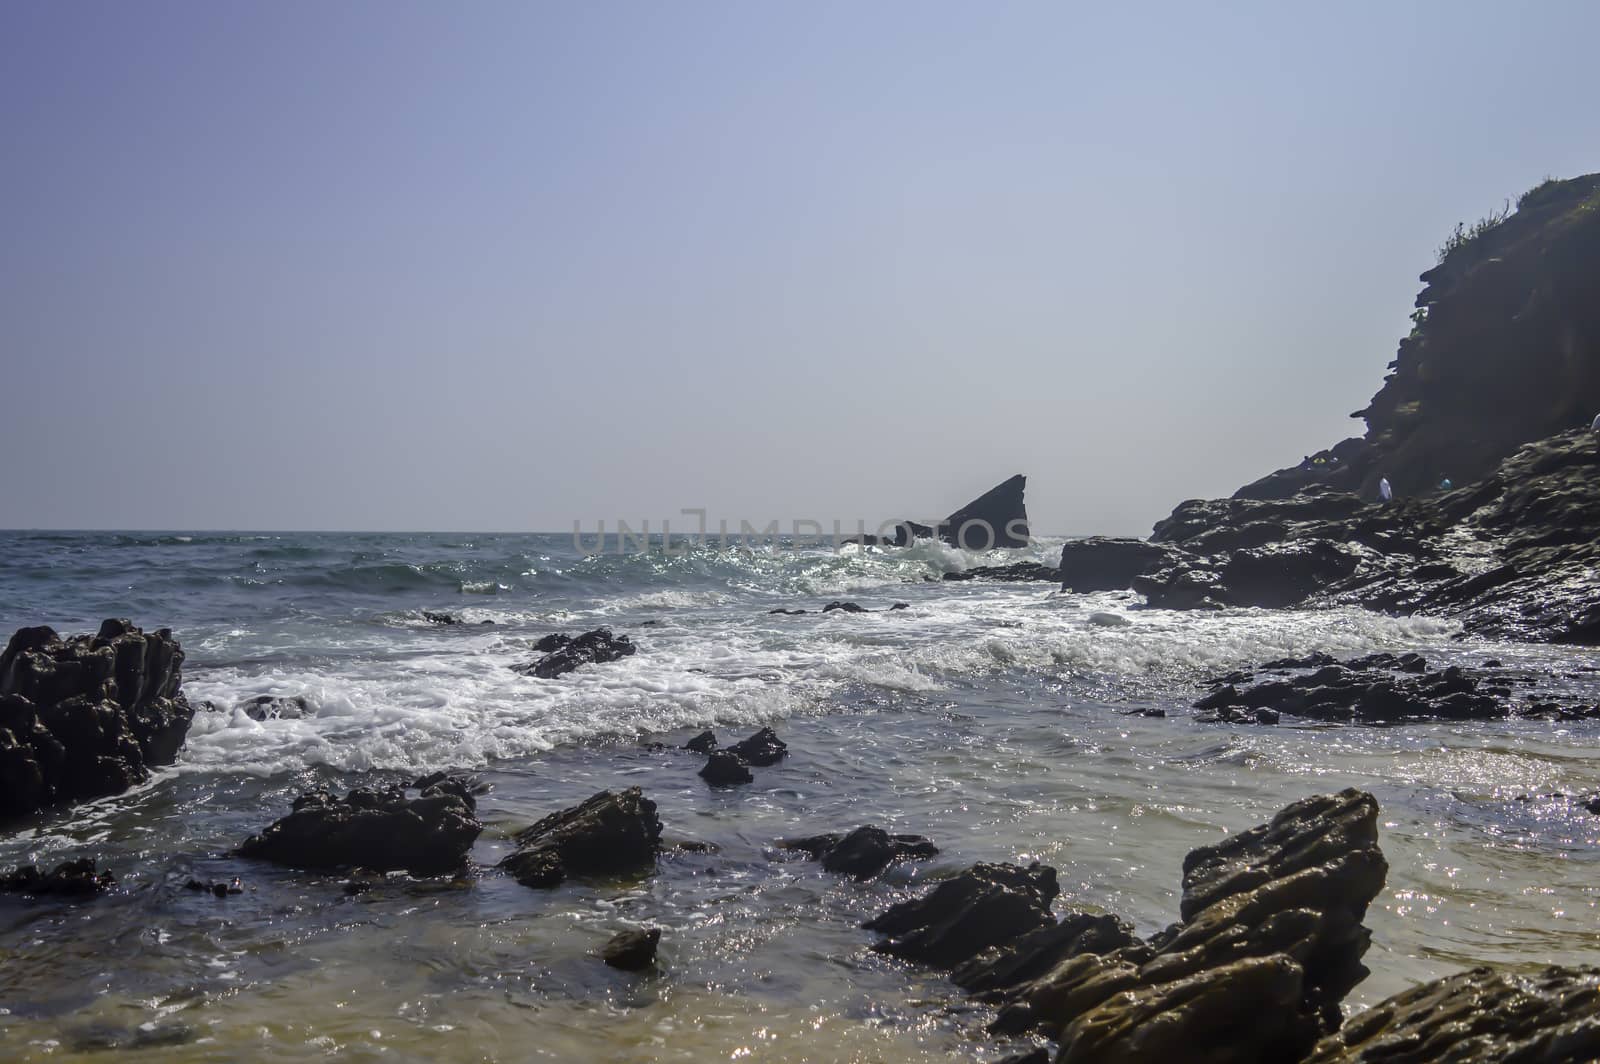 Sea beach on bay of Indian Ocean, Goa, India. Emerald waves of ocean under blue sky. Rocky coastline ends at sea shore and mountain. The coastline is filled with rocks and blue waves at sunset.